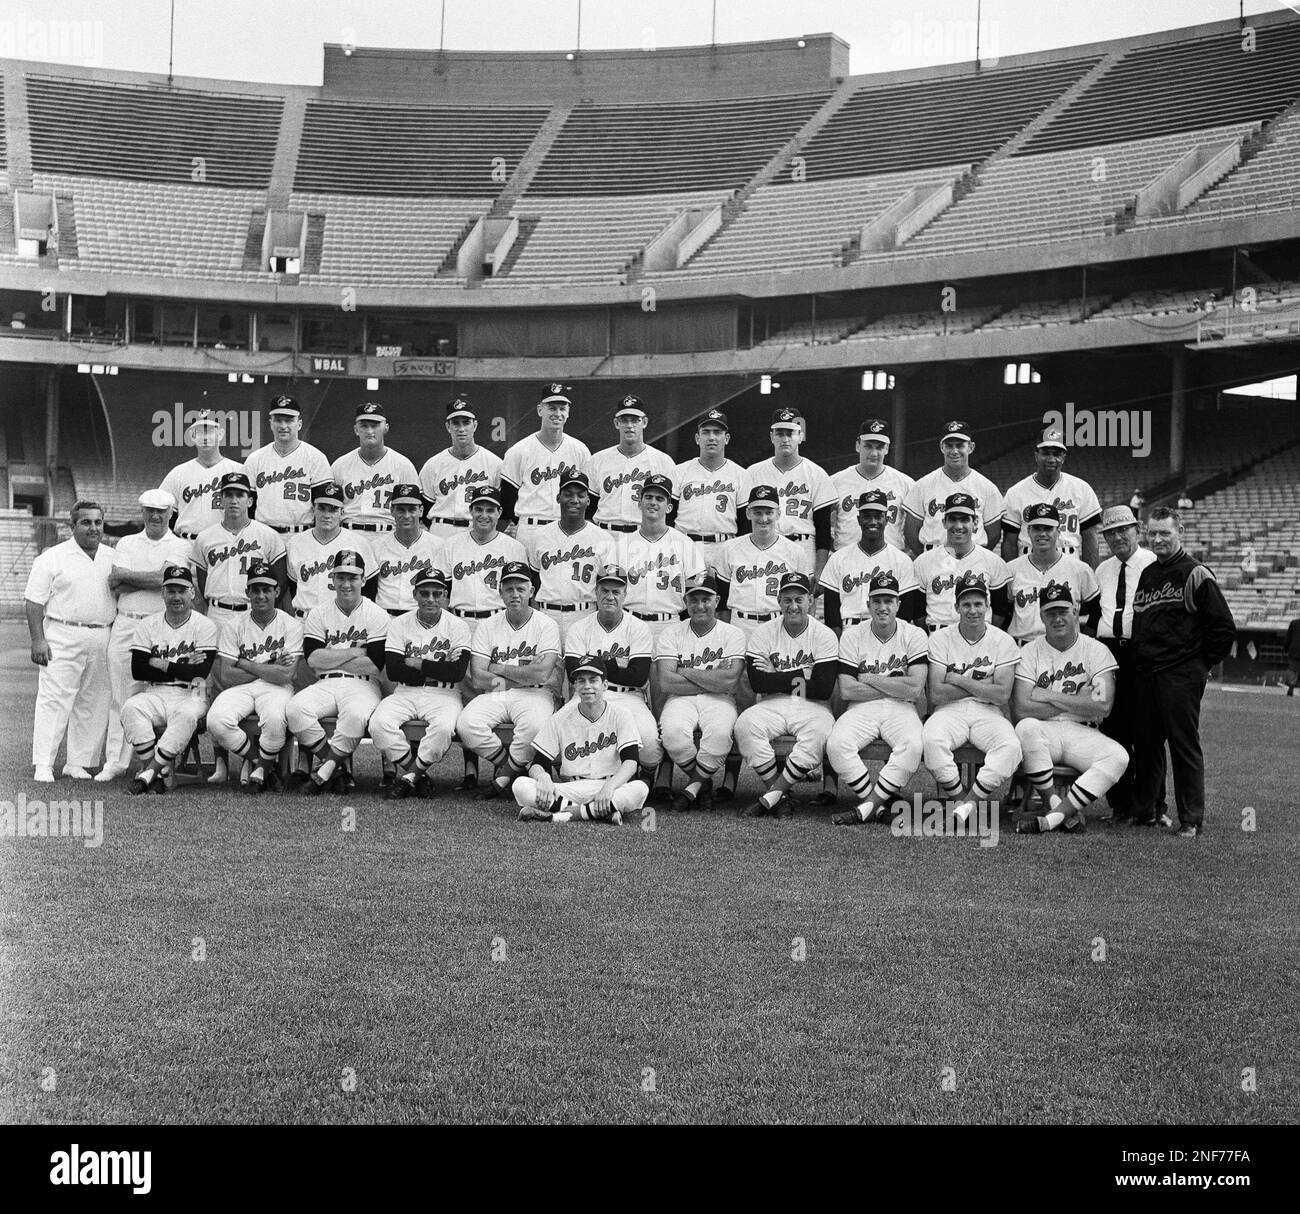 The 1966 Baltimore Orioles, winners of the American League pennant, are shown in Baltimore, Sept